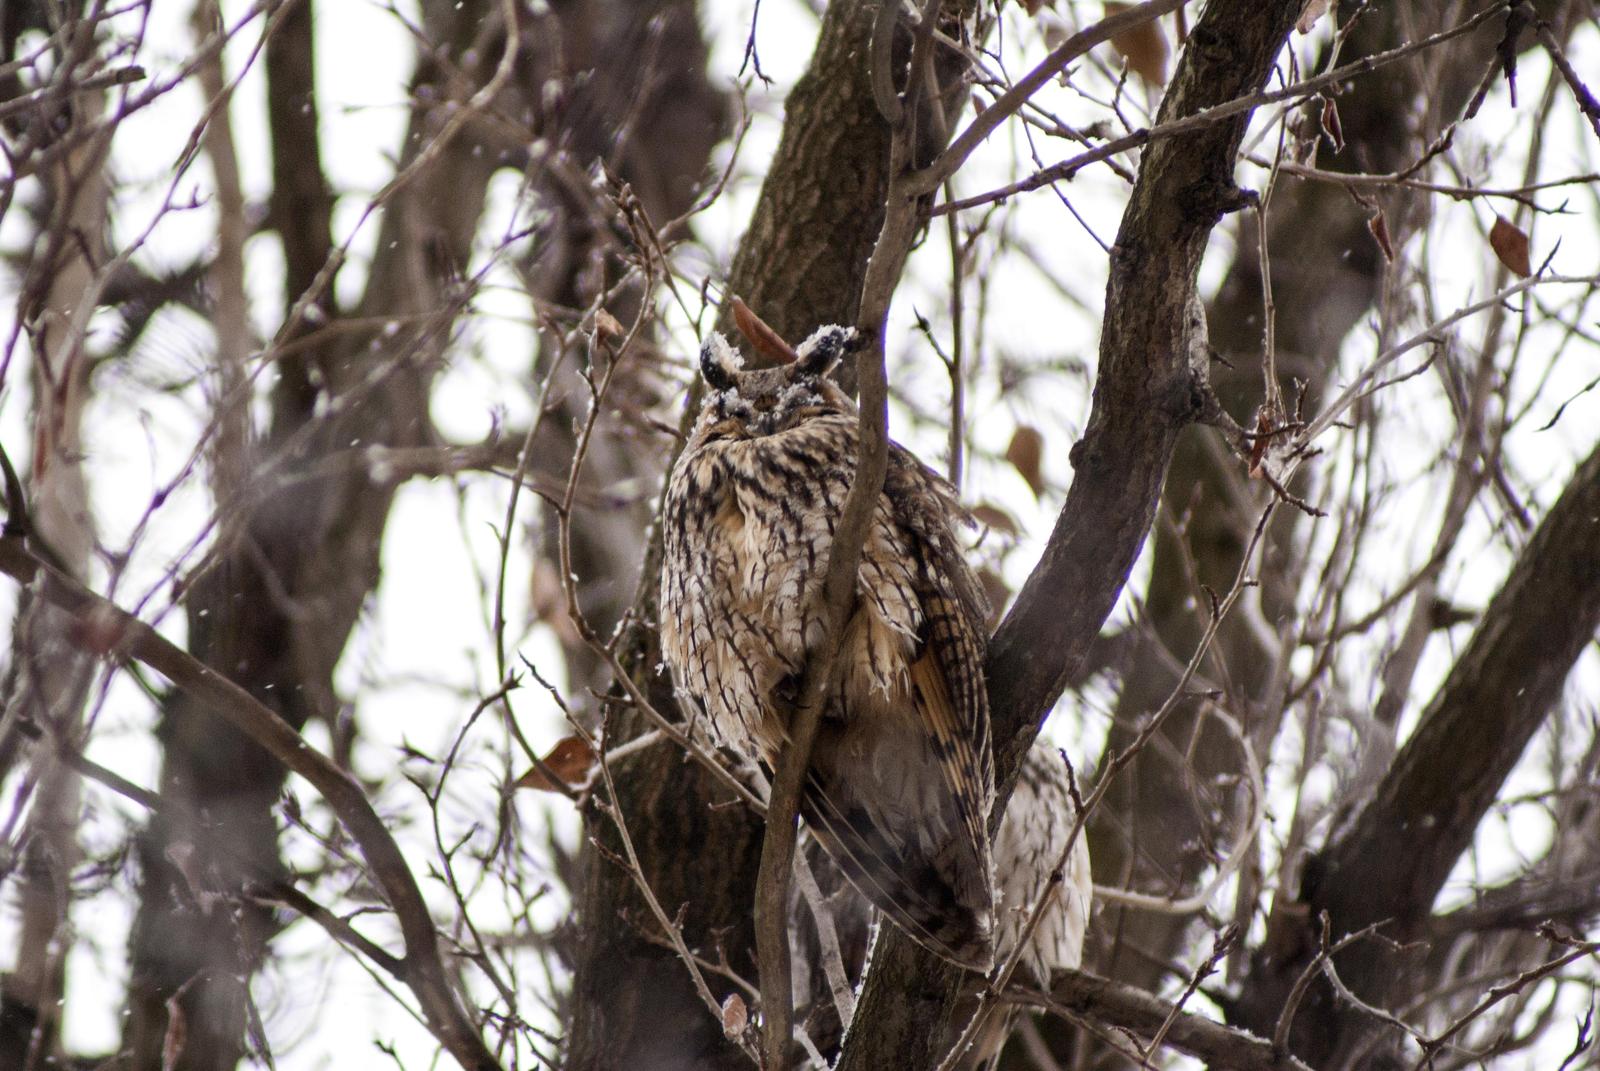 Long-eared Owl Photo by African Googre